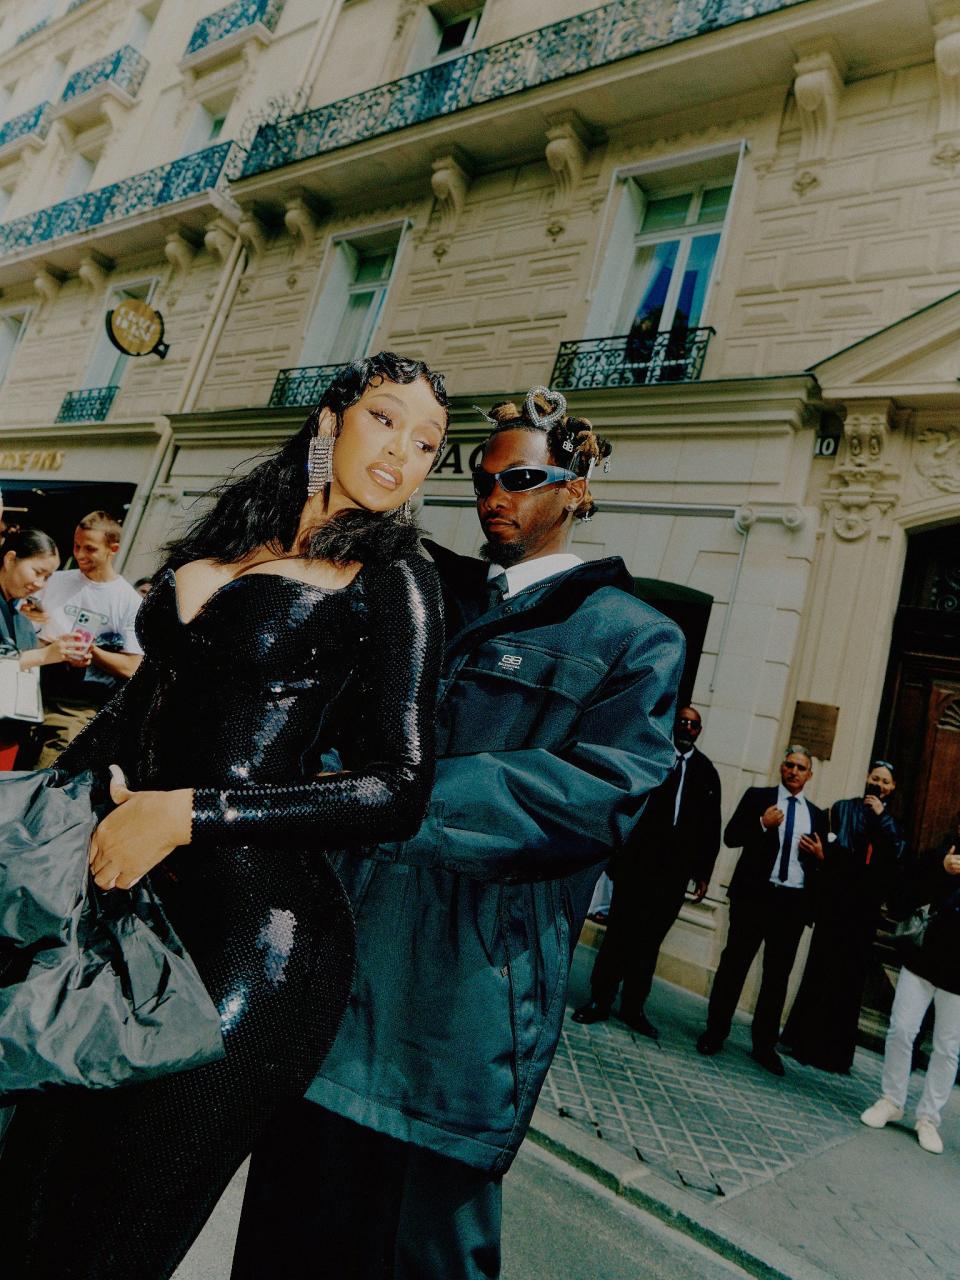 A-list duo Cardi B and her husband Offset showed up to the July 5 Balenciaga runway in matching black looks amid cheating rumors.